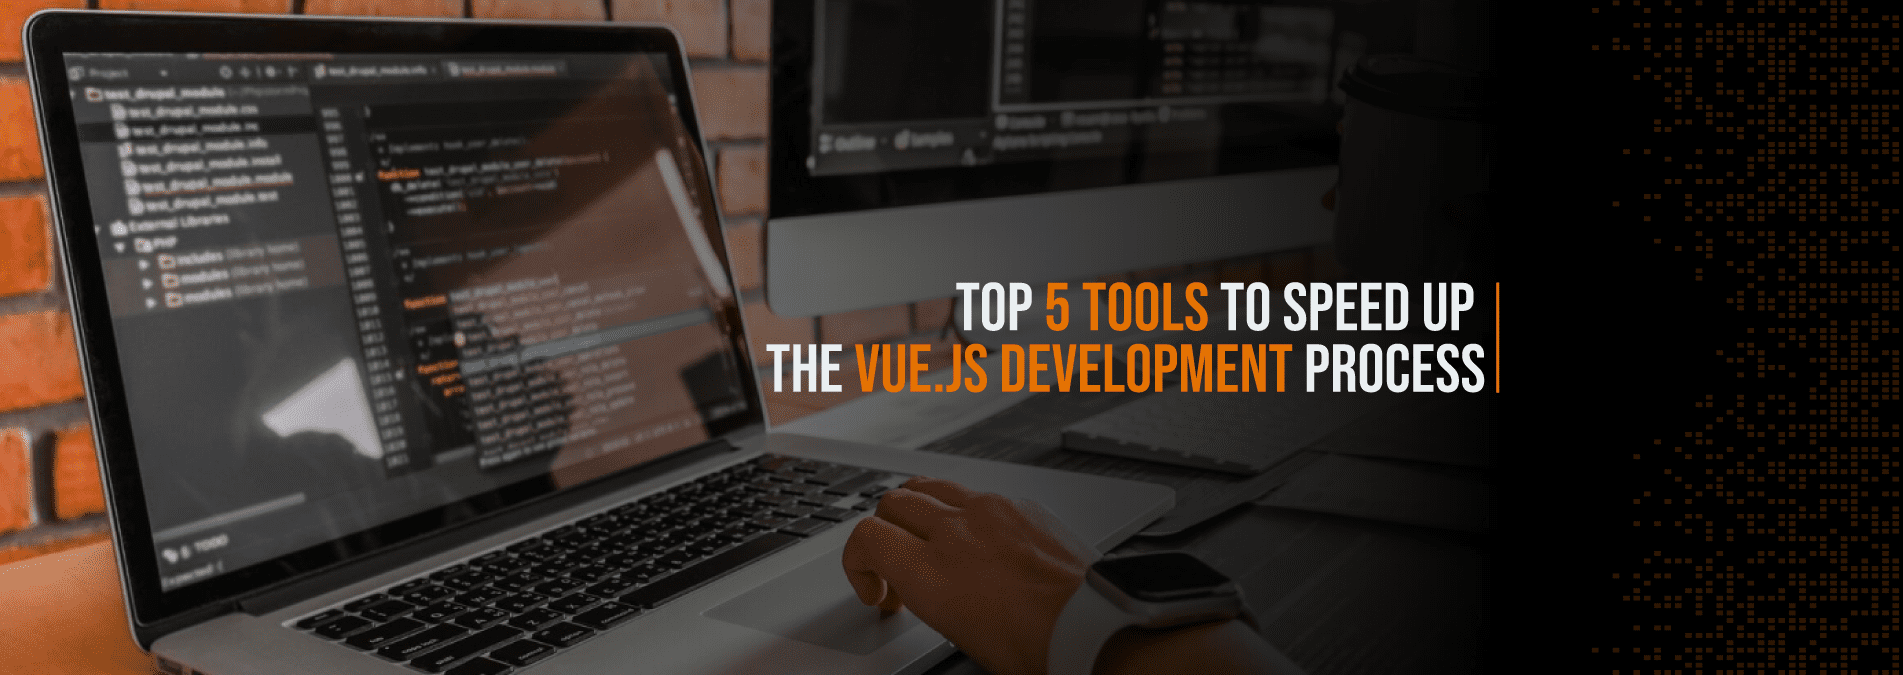 Top-5-Tools-To-Speed-Up-The-Vue.js-Development-Process Internet Soft